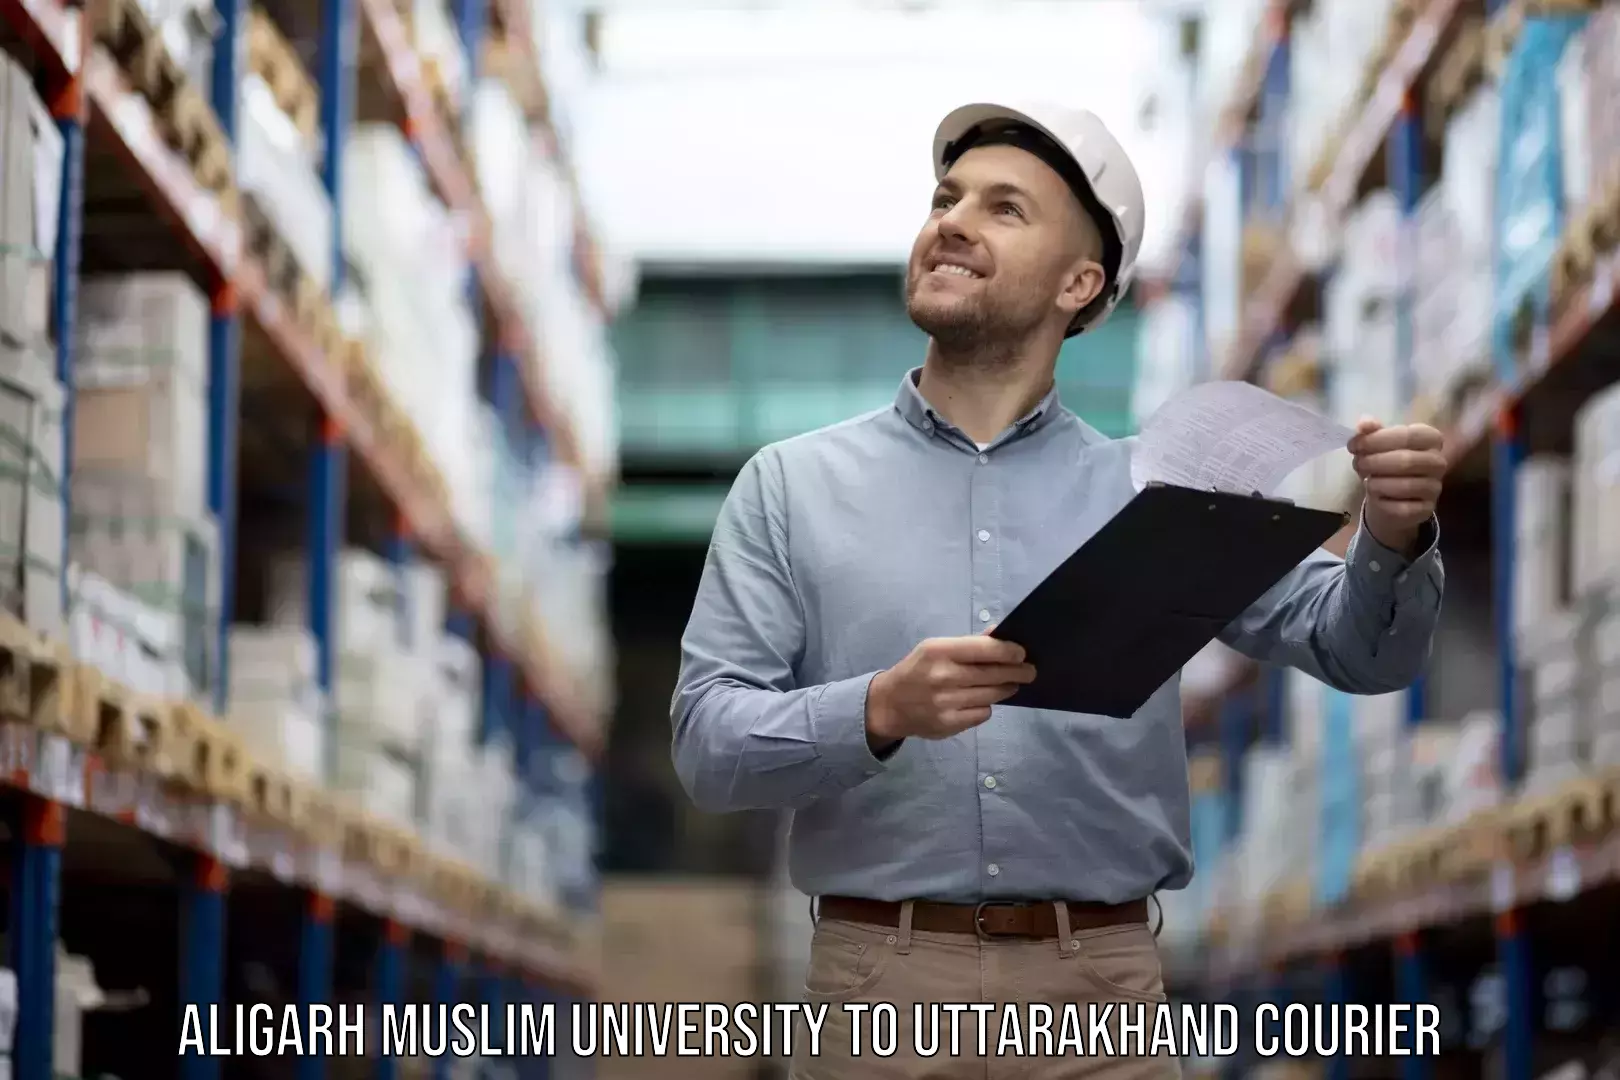 Affordable relocation services in Aligarh Muslim University to Gairsain